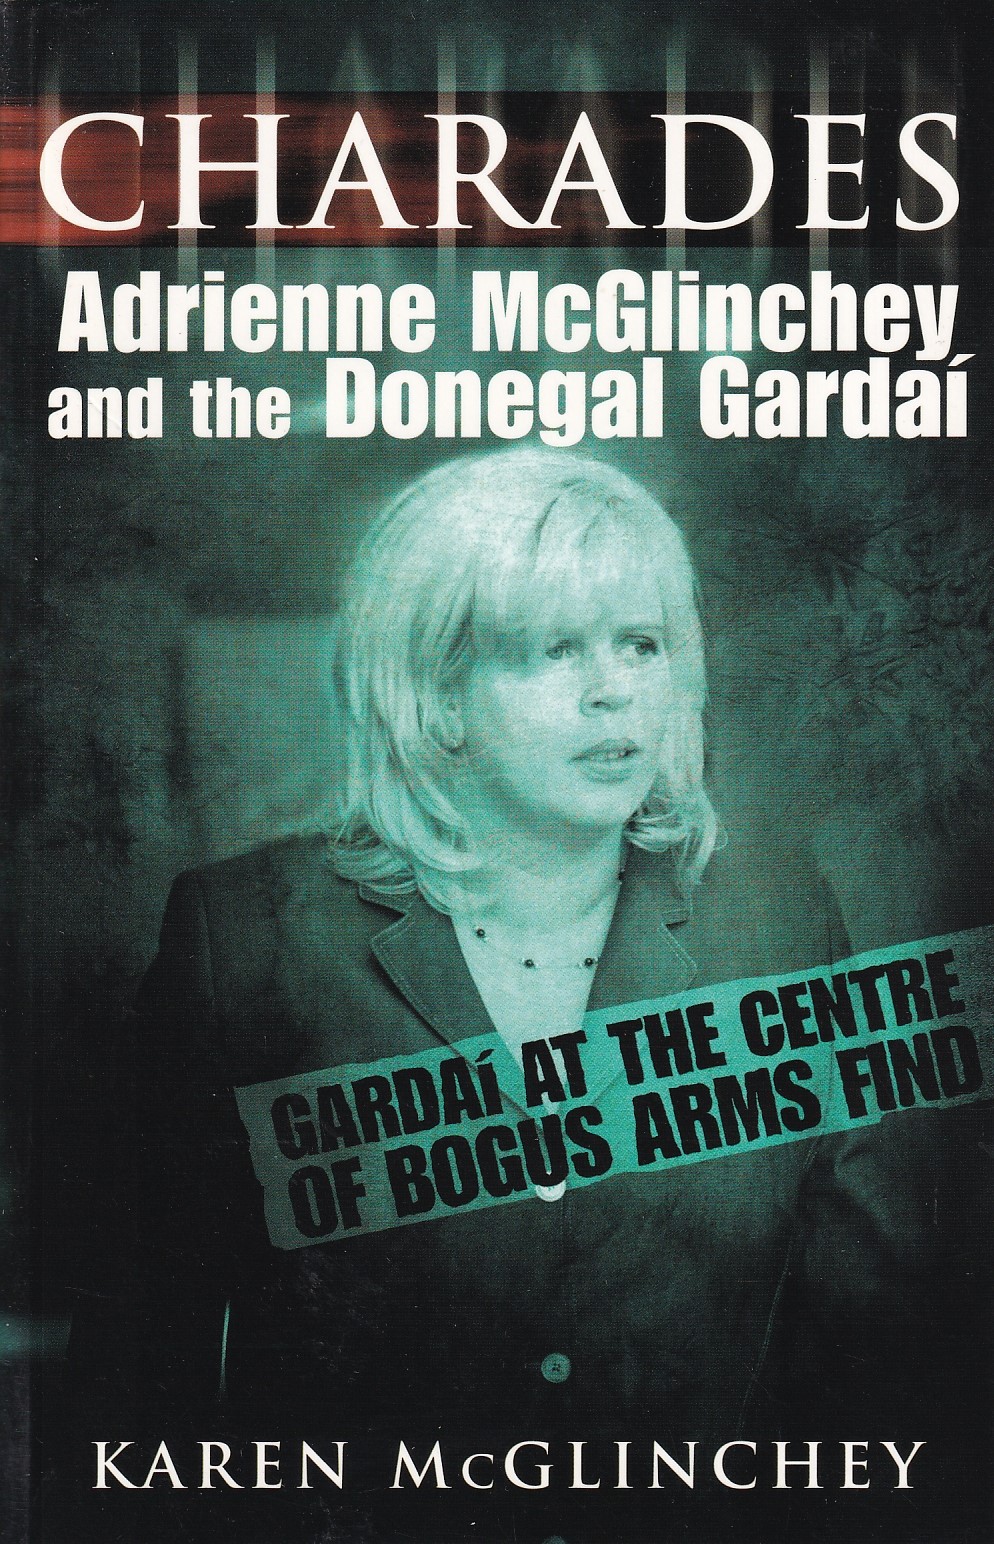 Charades: Adrienne McGlinchey and the Donegal Gardai | Karen McGlinchey | Charlie Byrne's